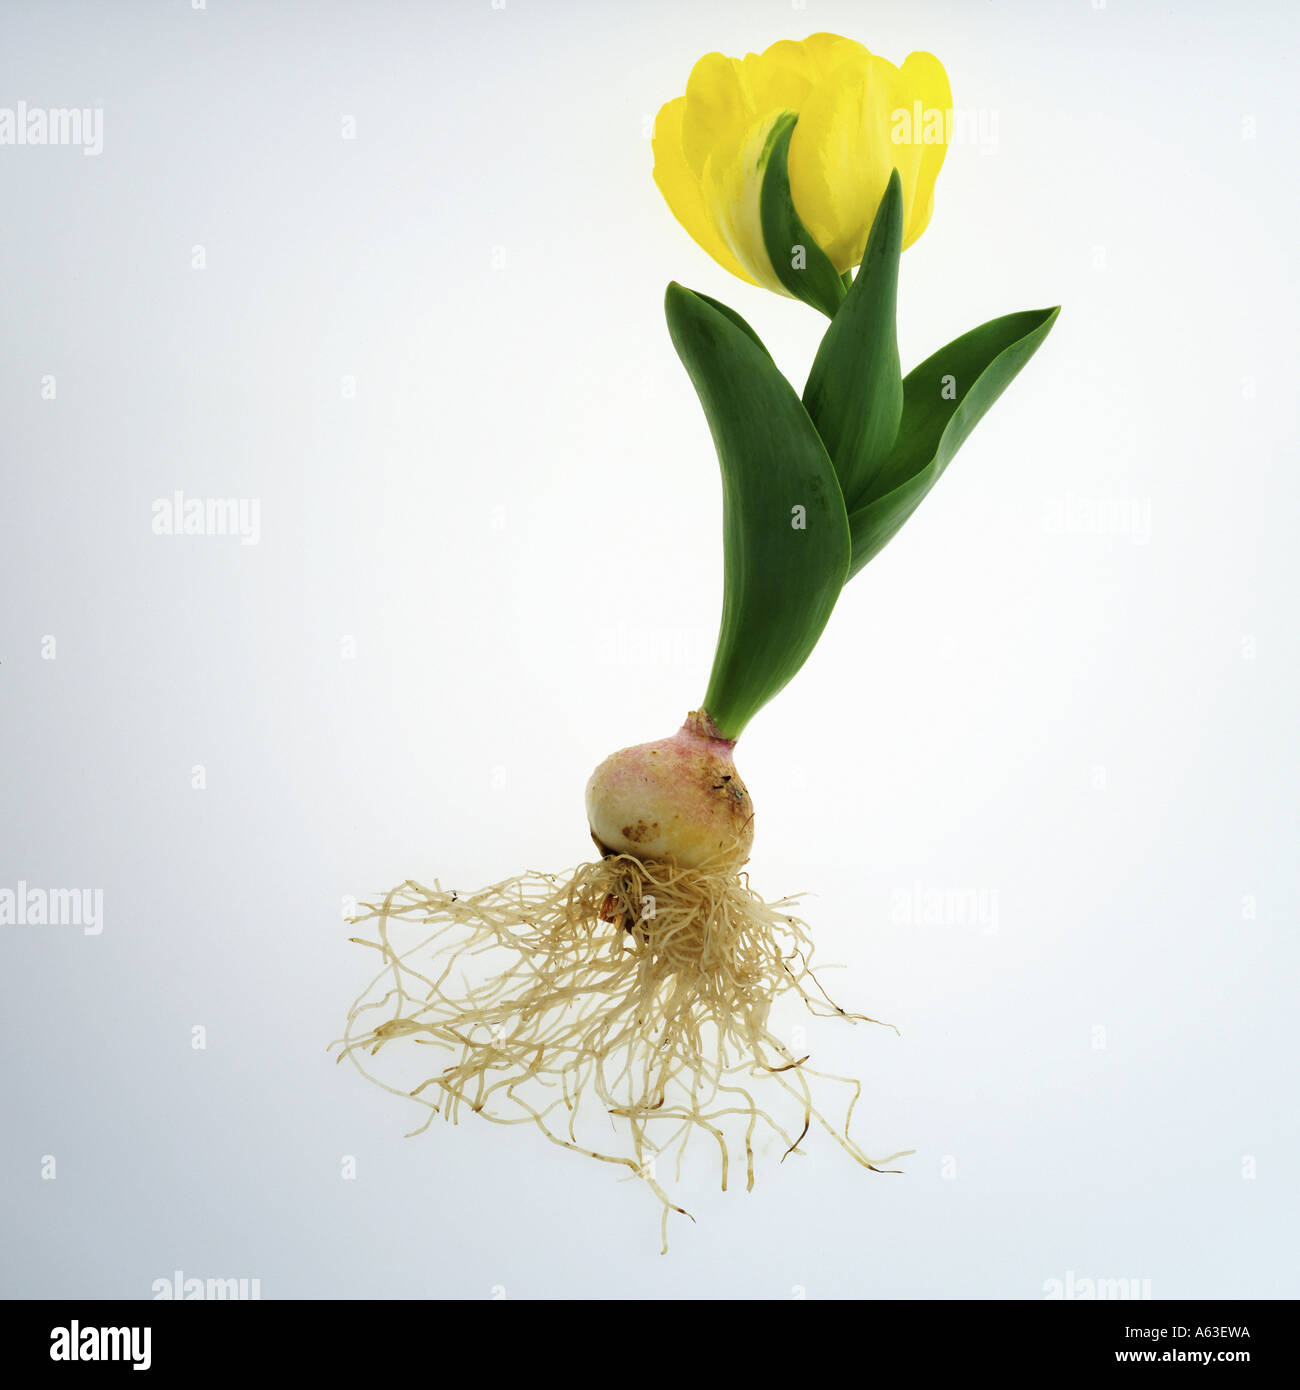 Close-up of tulip flower with roots against white background Stock Photo